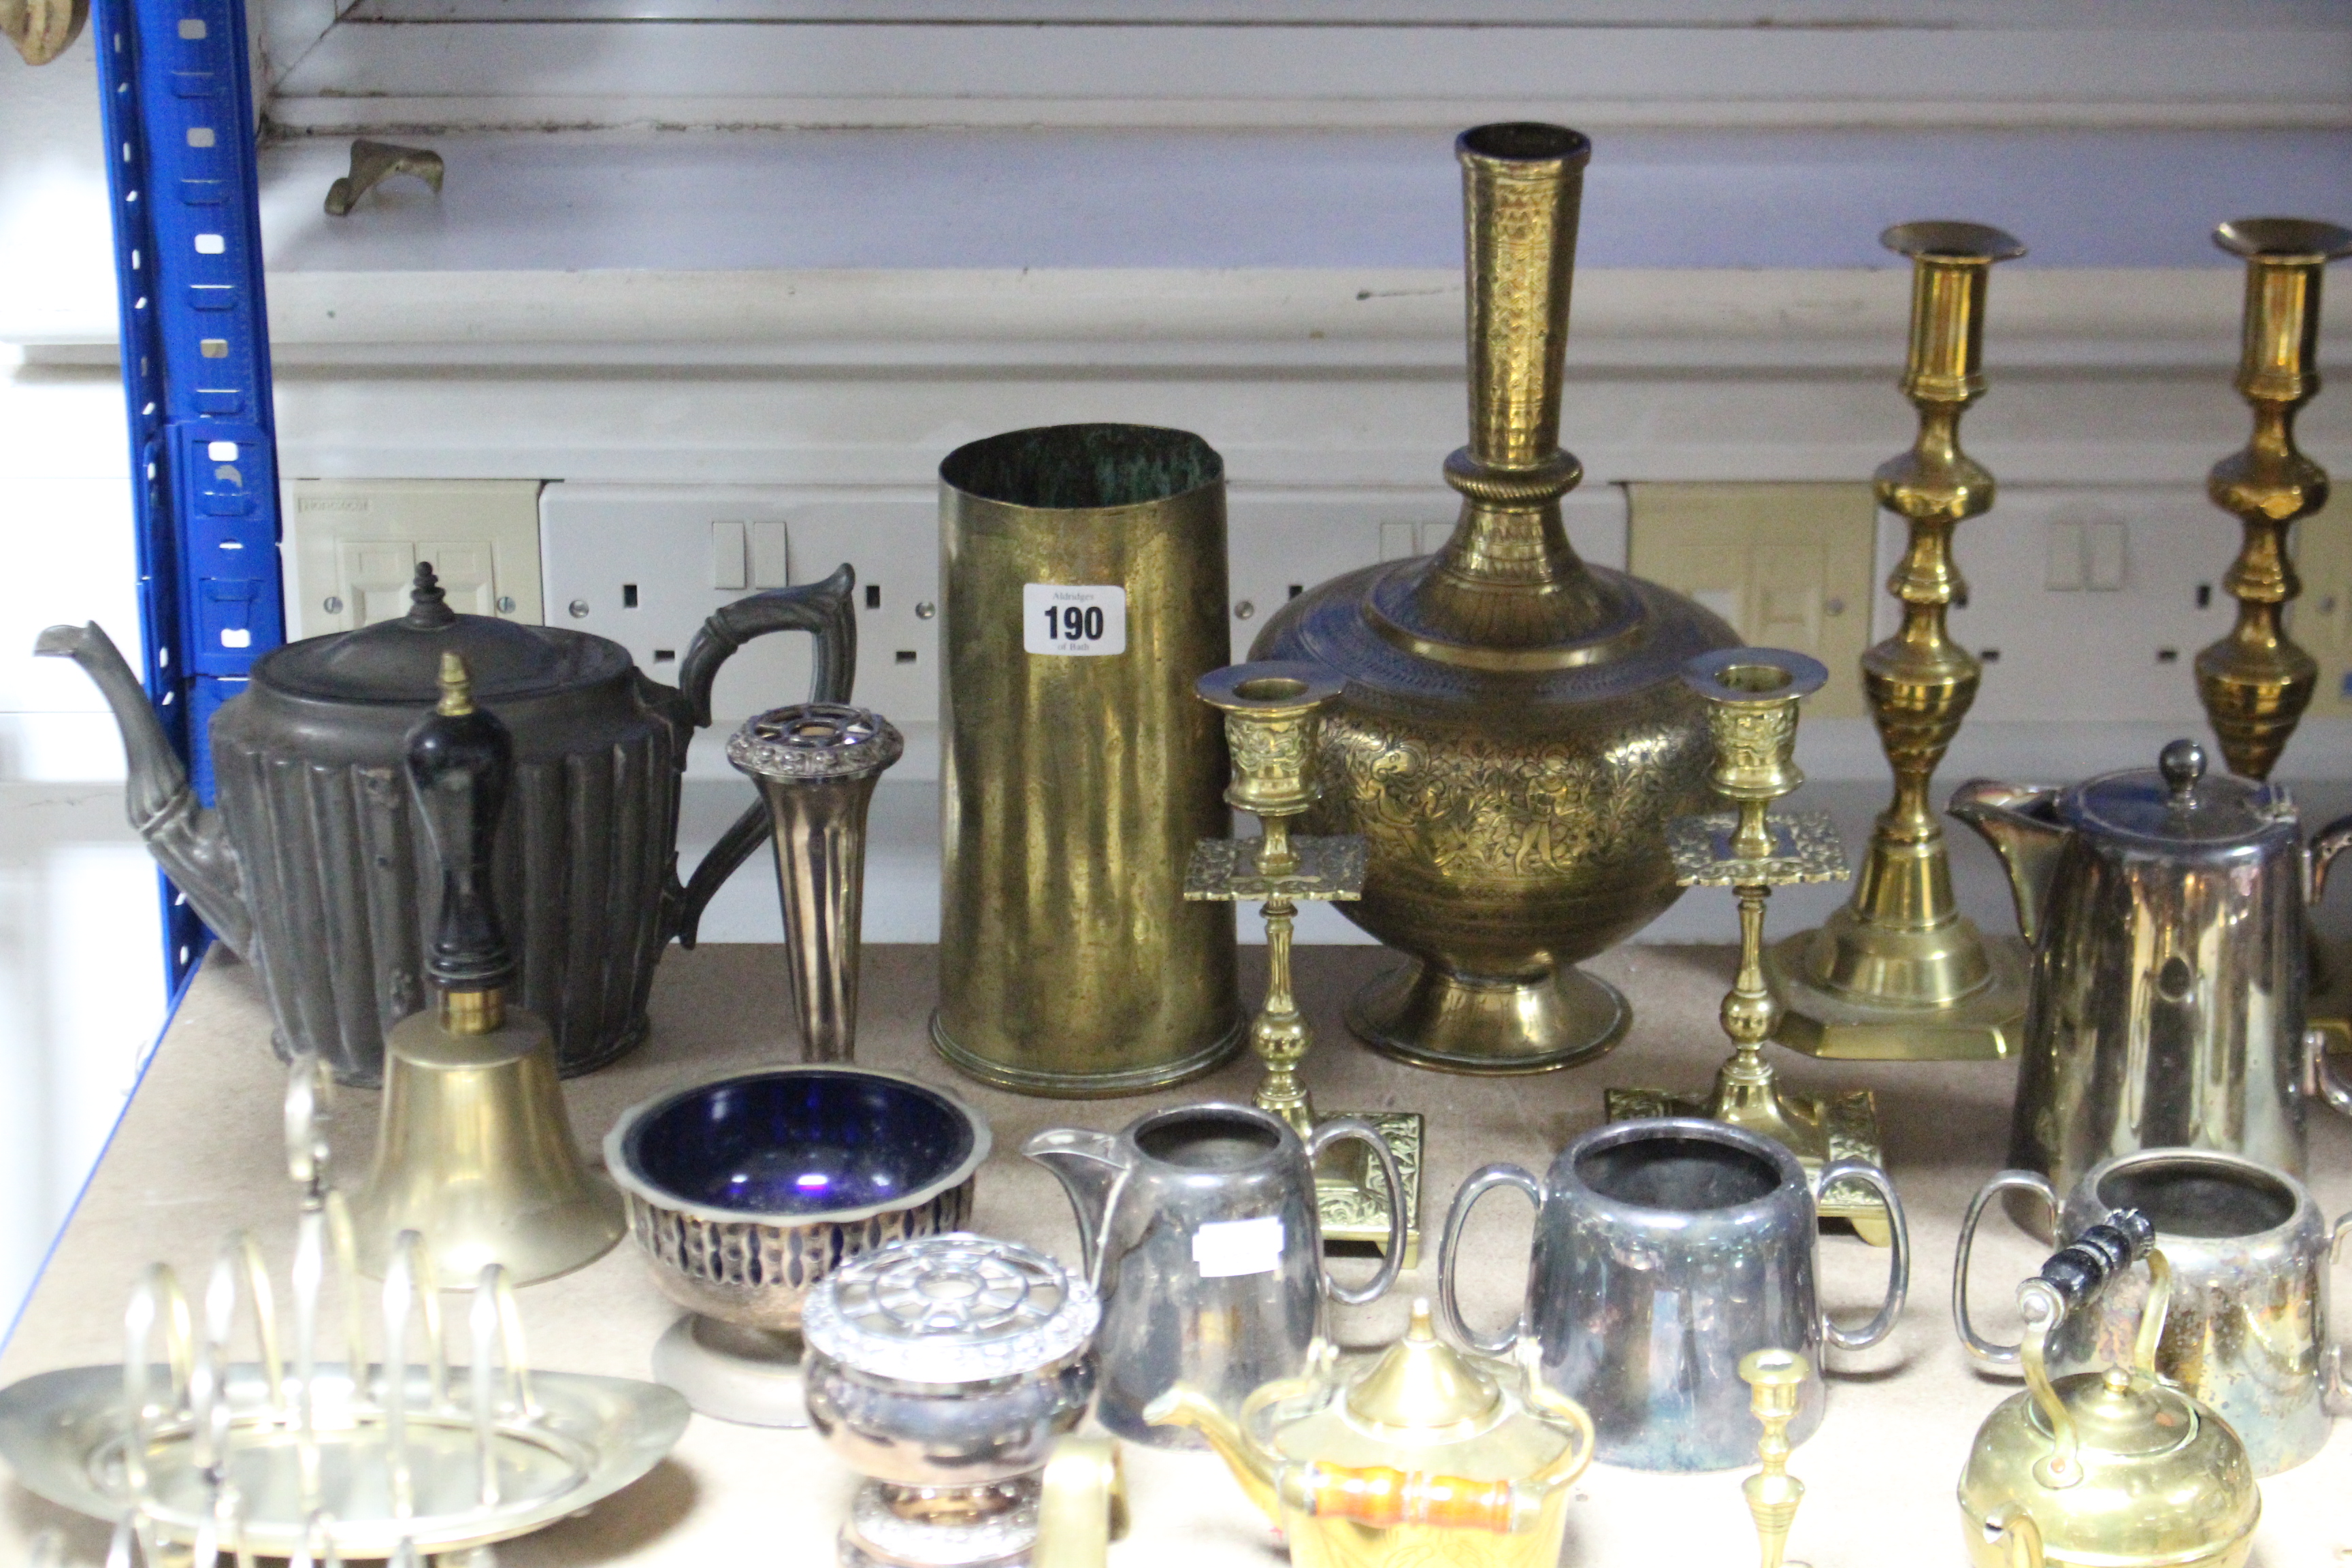 Two pairs of brass candlesticks, 10”, & 6” high; & various other items of metalware & plated ware.